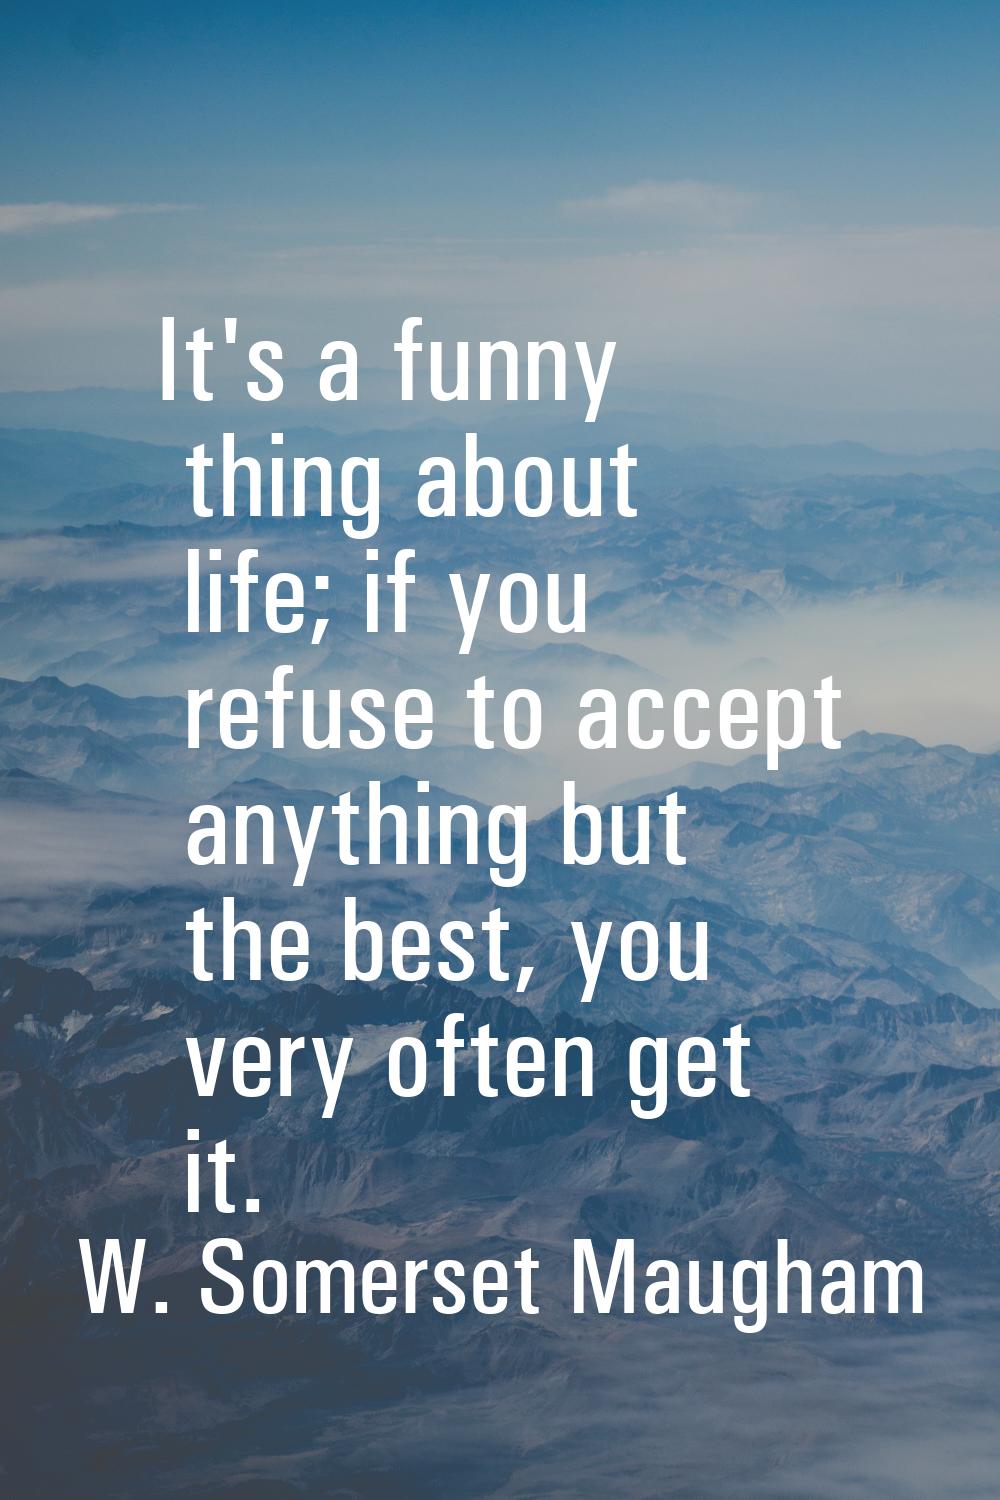 It's a funny thing about life; if you refuse to accept anything but the best, you very often get it